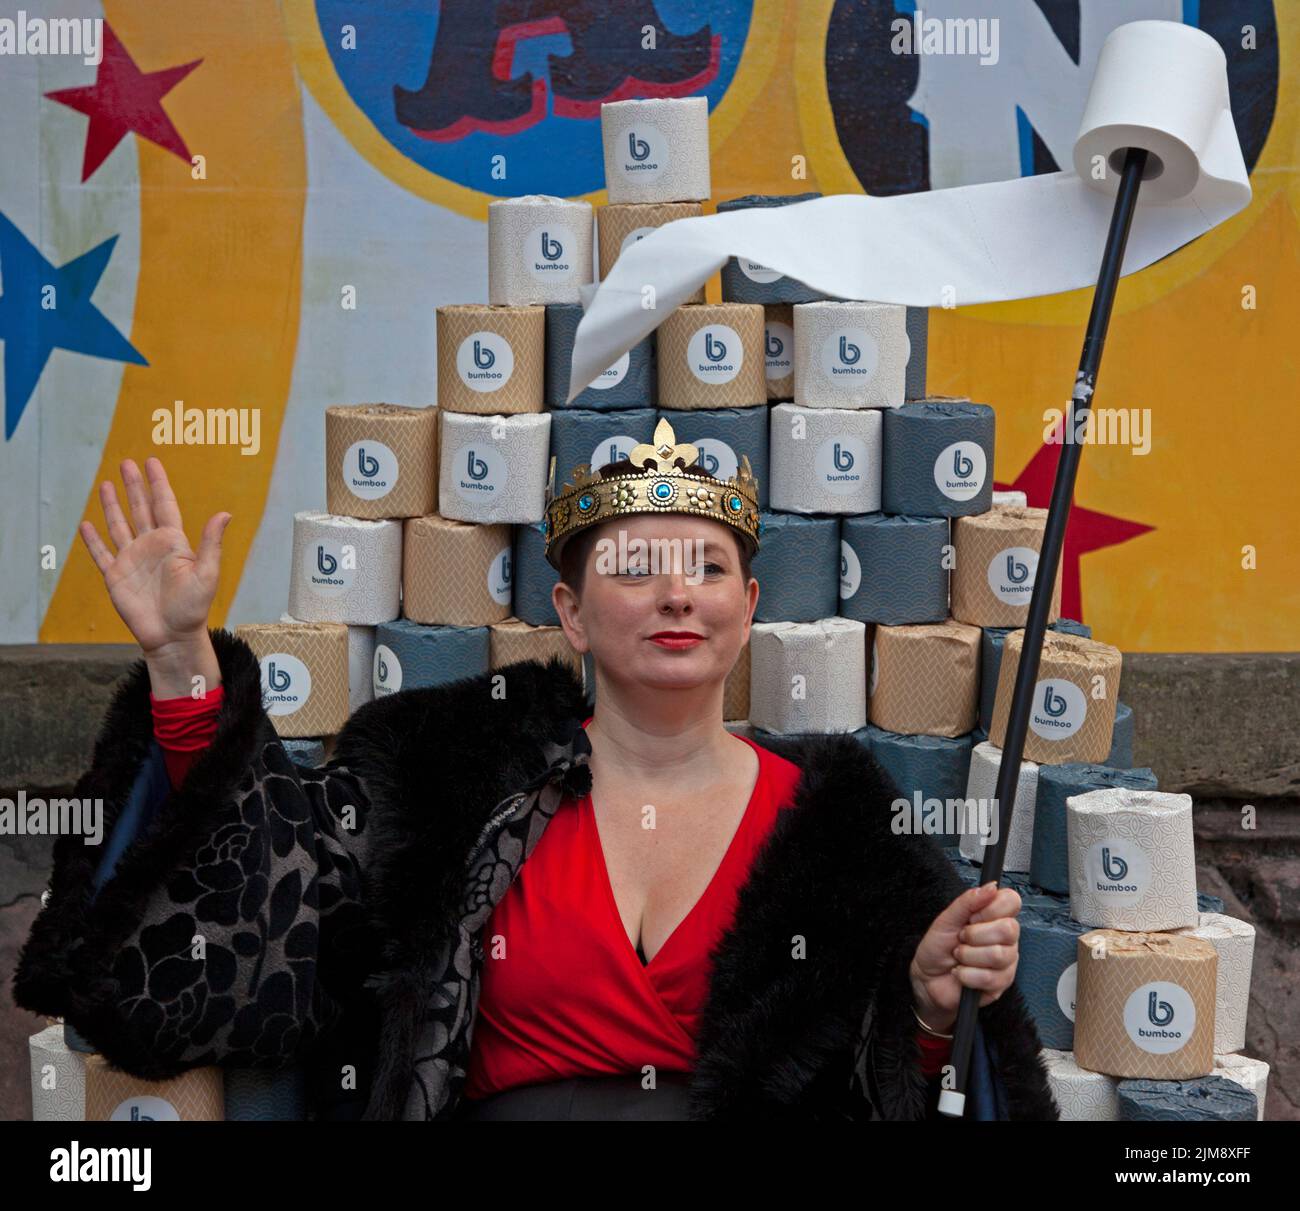 EdFringe Photocall: Pleasance Courtyard, Edinburgh, Scotland, UK. 5th August 2022.Writer & performer of BAFTA Rocliffe winning show, BADASS, Sarah Mills is joined by Bowel Cancer UK as she sits atop a throne of toilet roll. Launching her campaign, working with Bowel Cancer UK and toilet roll manufacturer Bumboo, she has announced that every audience member will take home a free toilet roll with a QR code that links to advice on symptoms & support for Bowel Cancer. Credit: ArchWhite/alamy live news Stock Photo